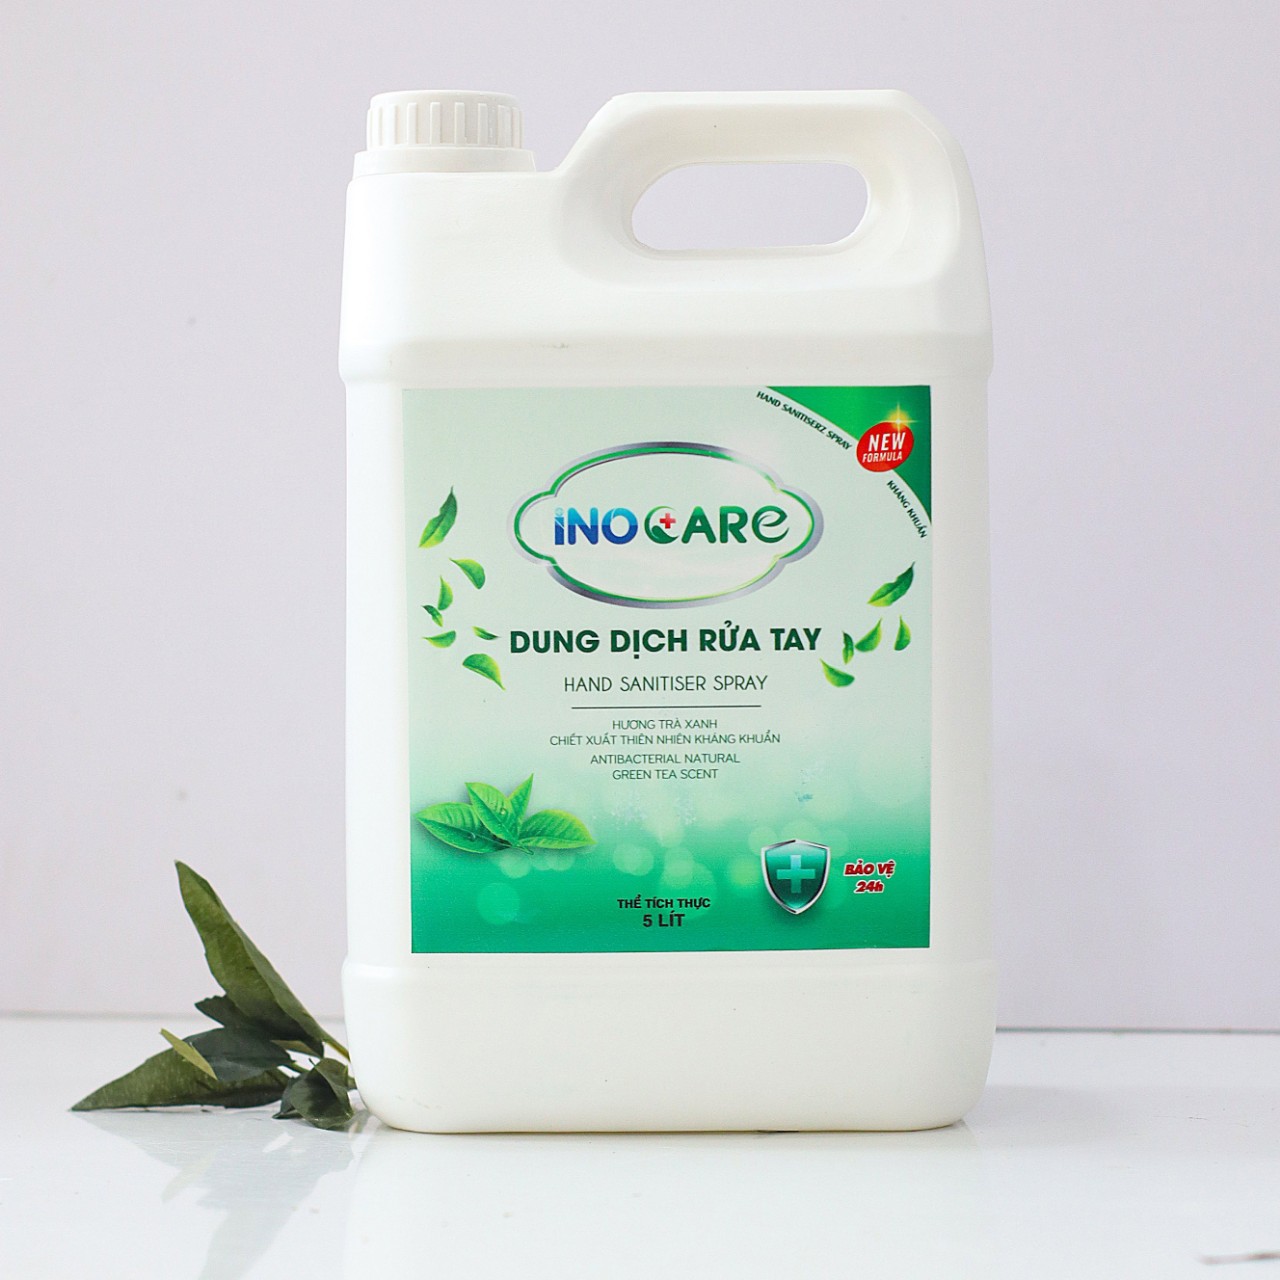 Dung dịch rửa tay Inocare